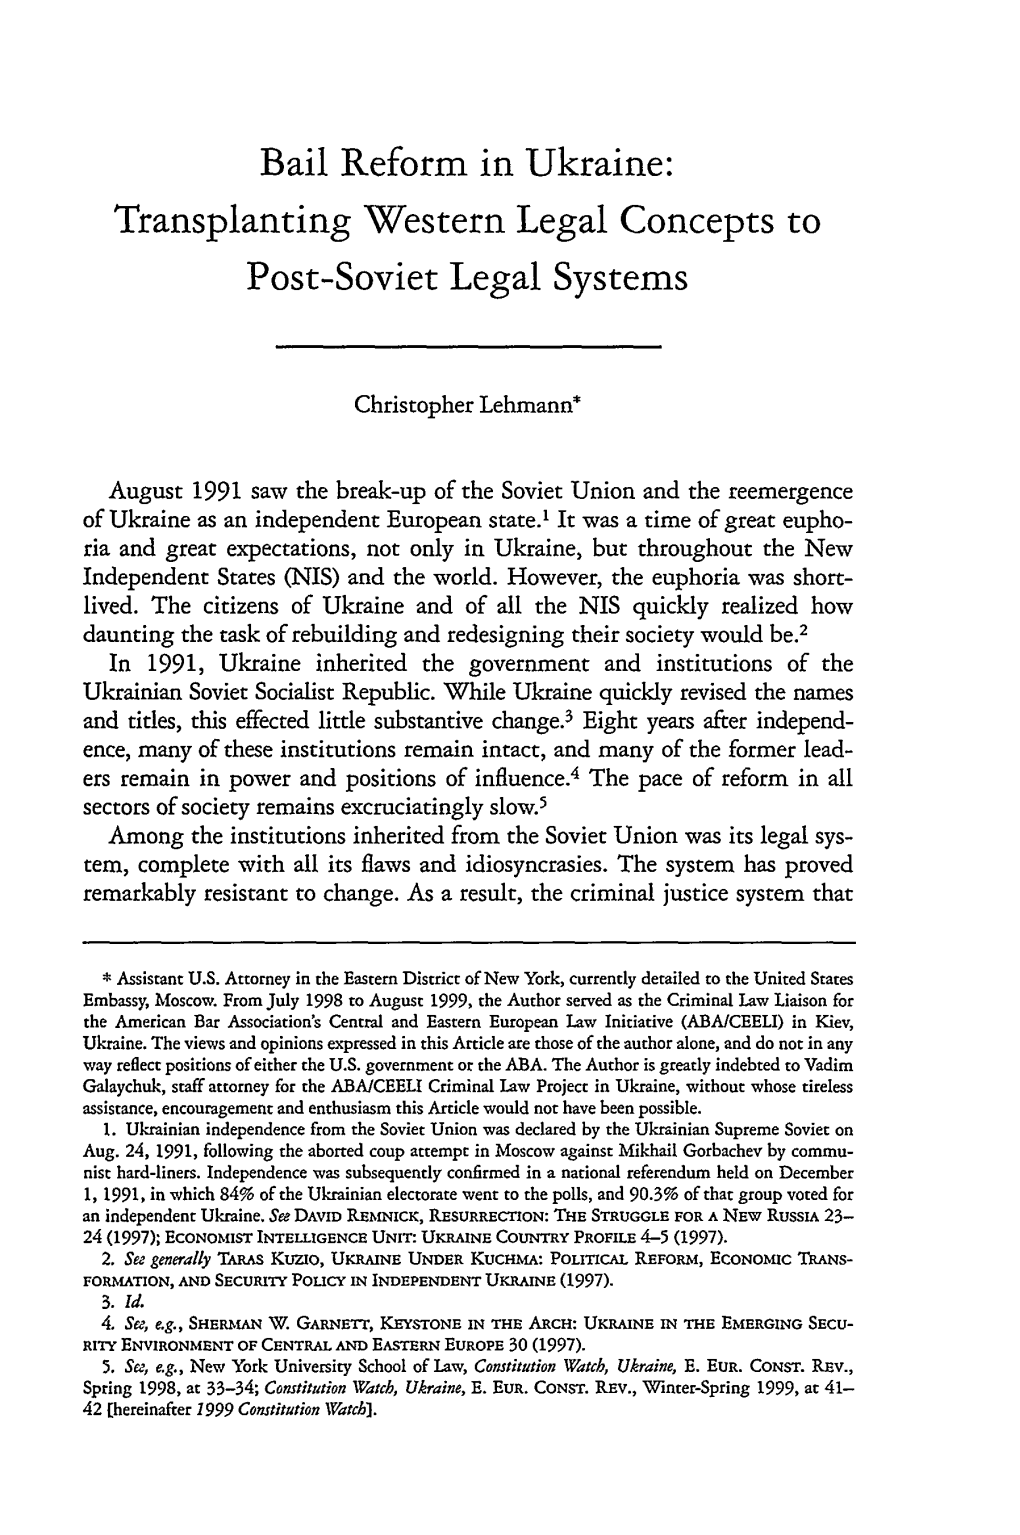 Bail Reform in Ukraine: Transplanting Western Legal Concepts to Post-Soviet Legal Systems